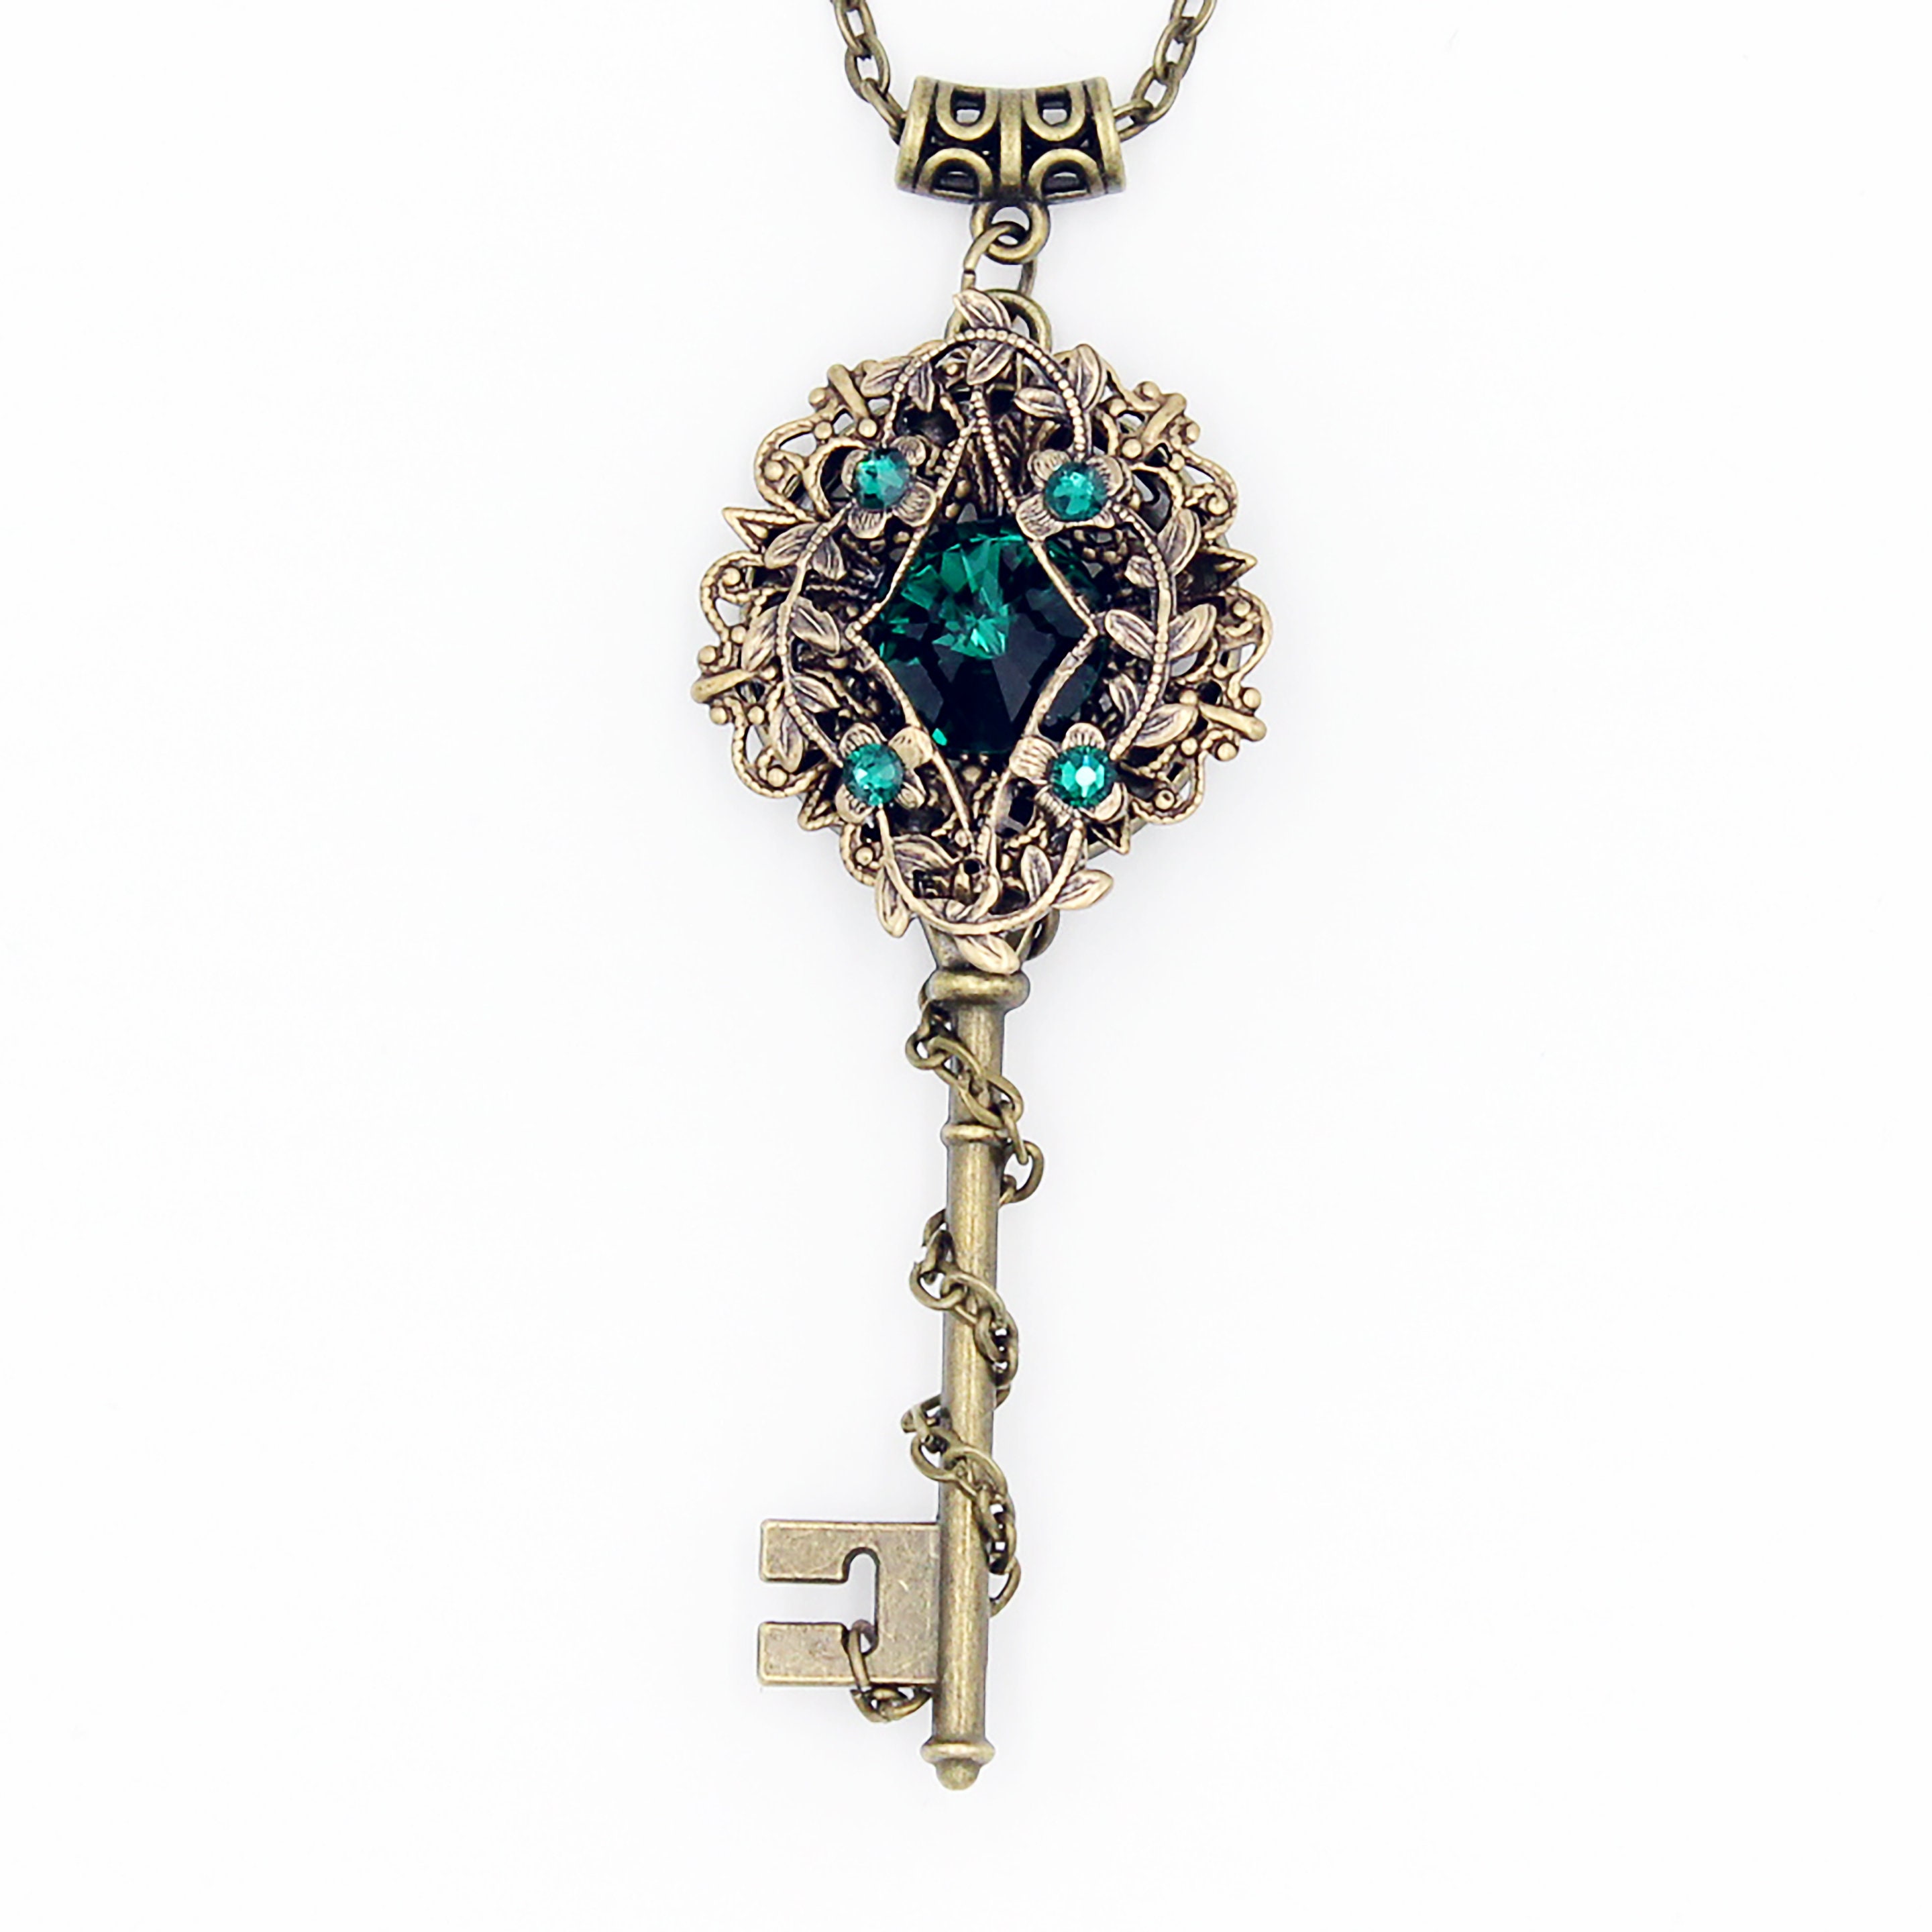 Brass Key to Your Heart Fantasy Necklace With Fairy and Swarovski